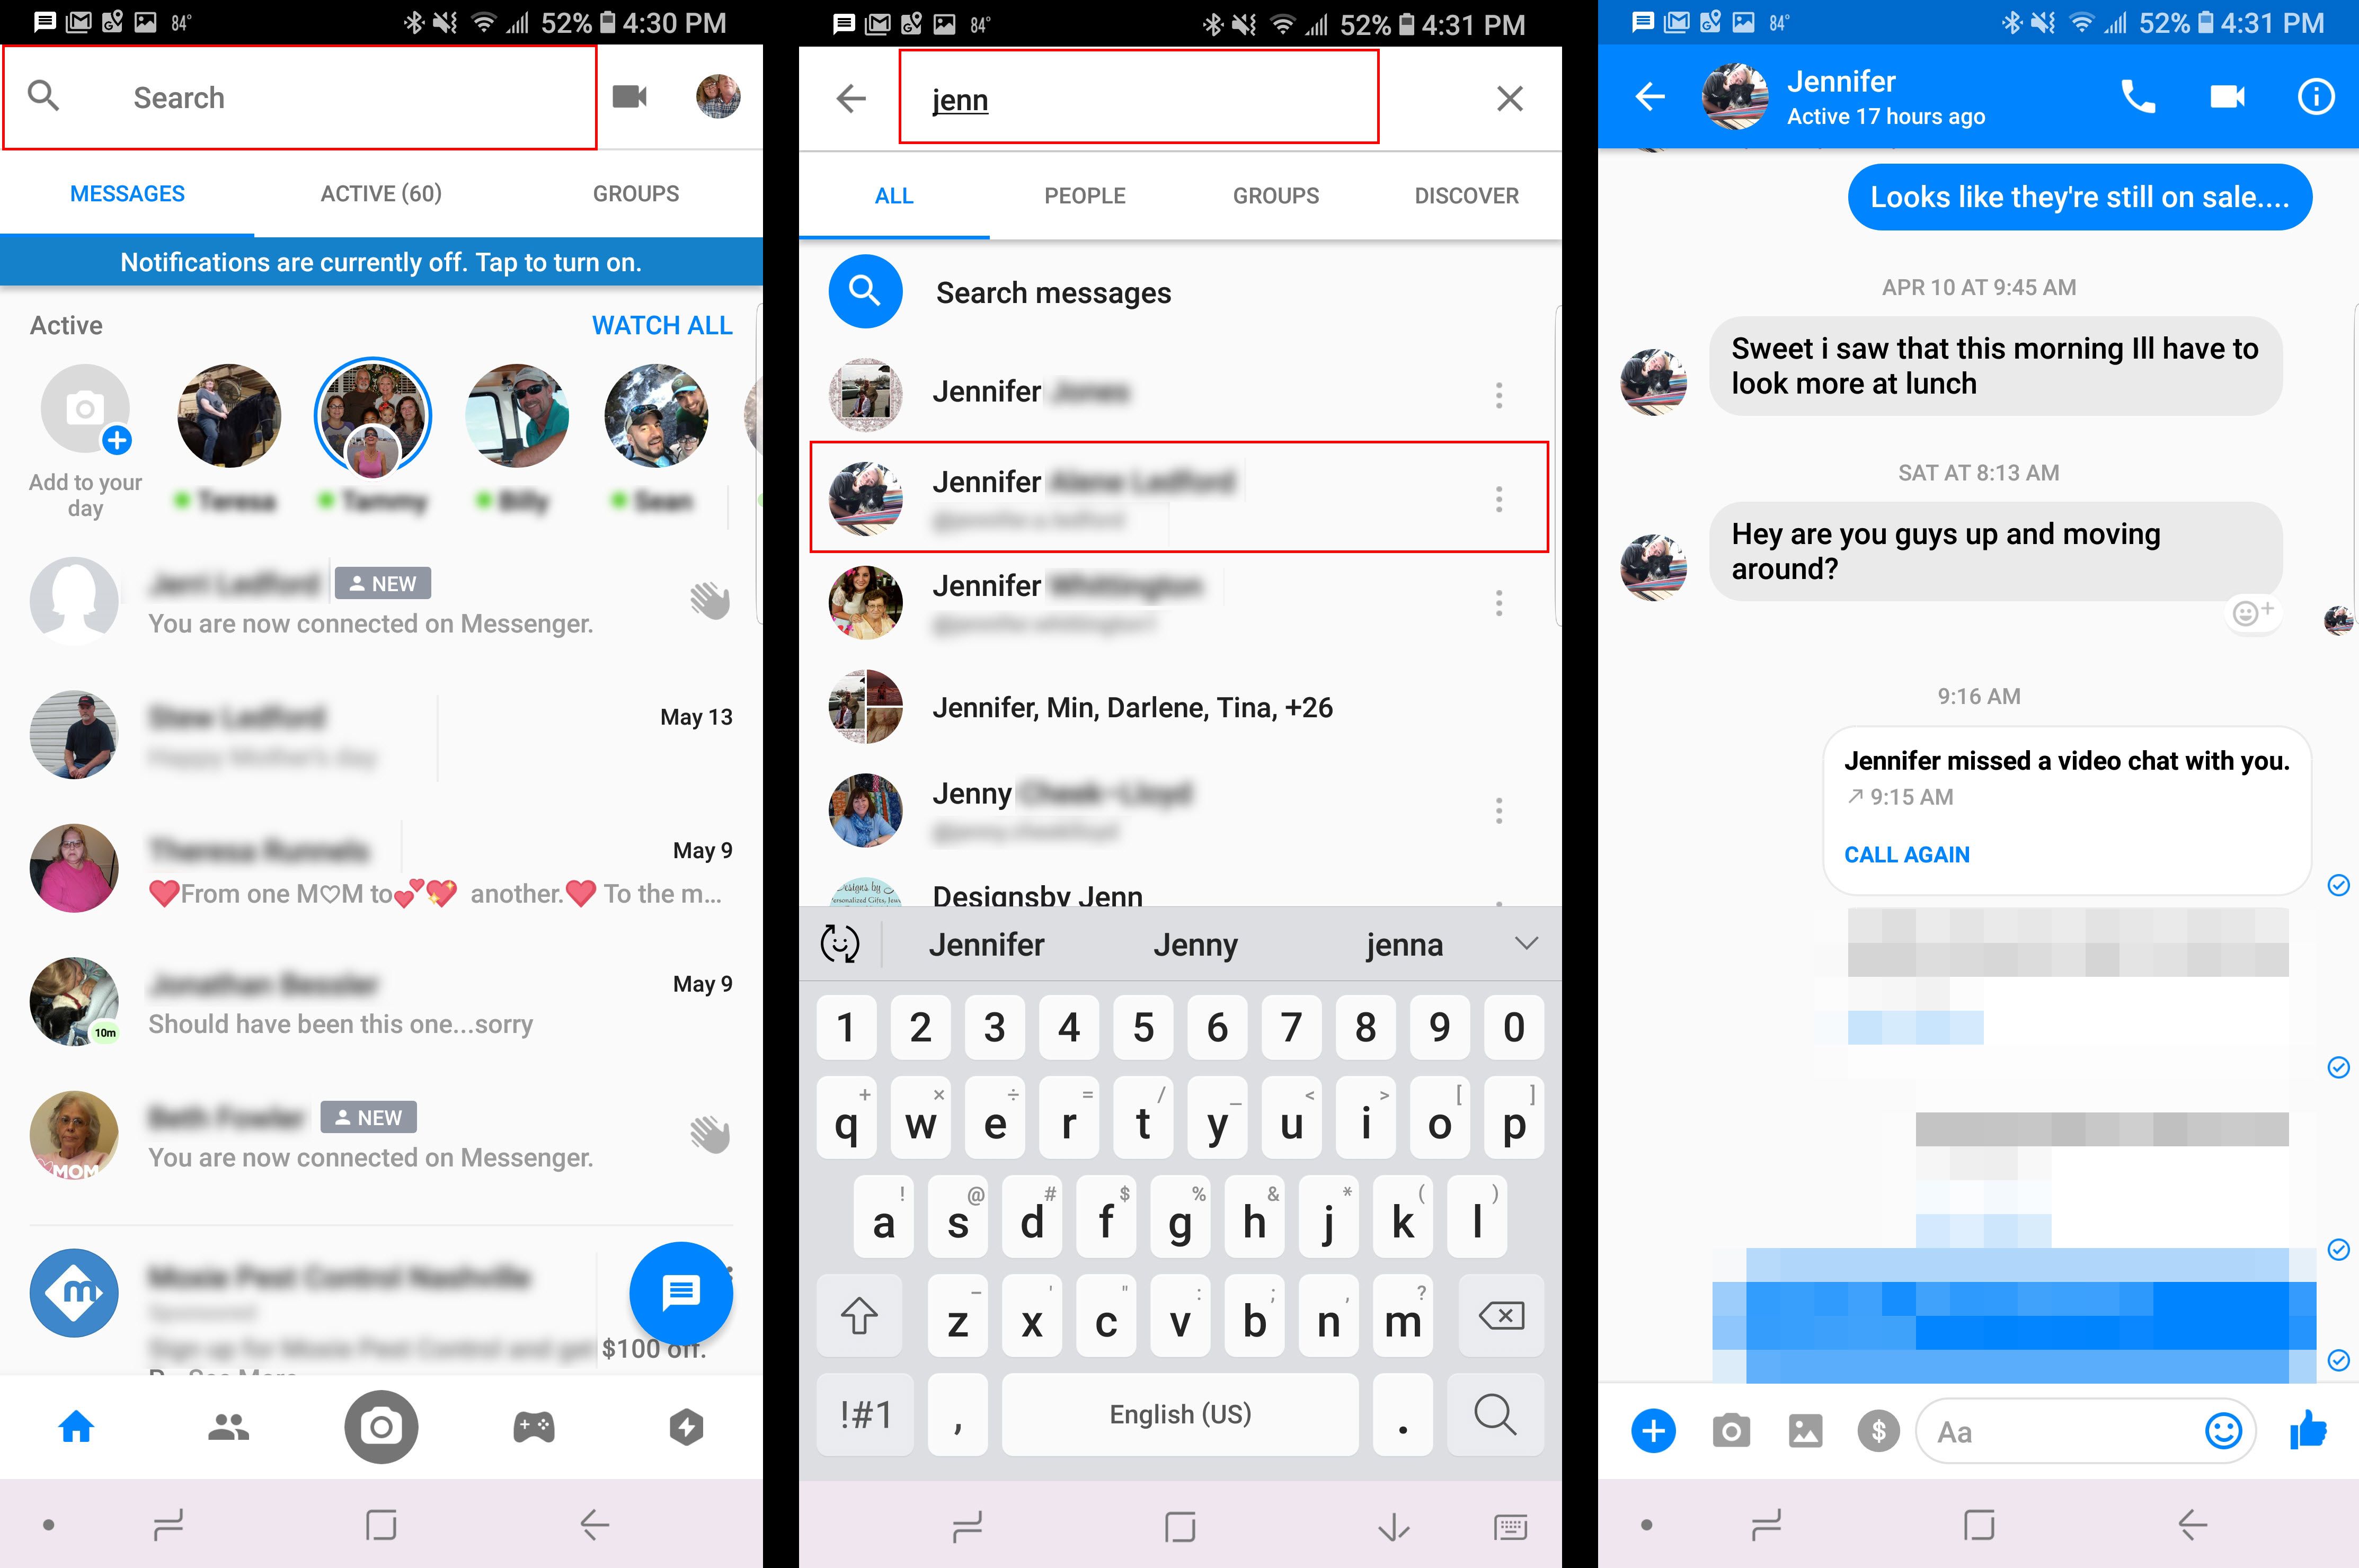 facebook messenger app settings android